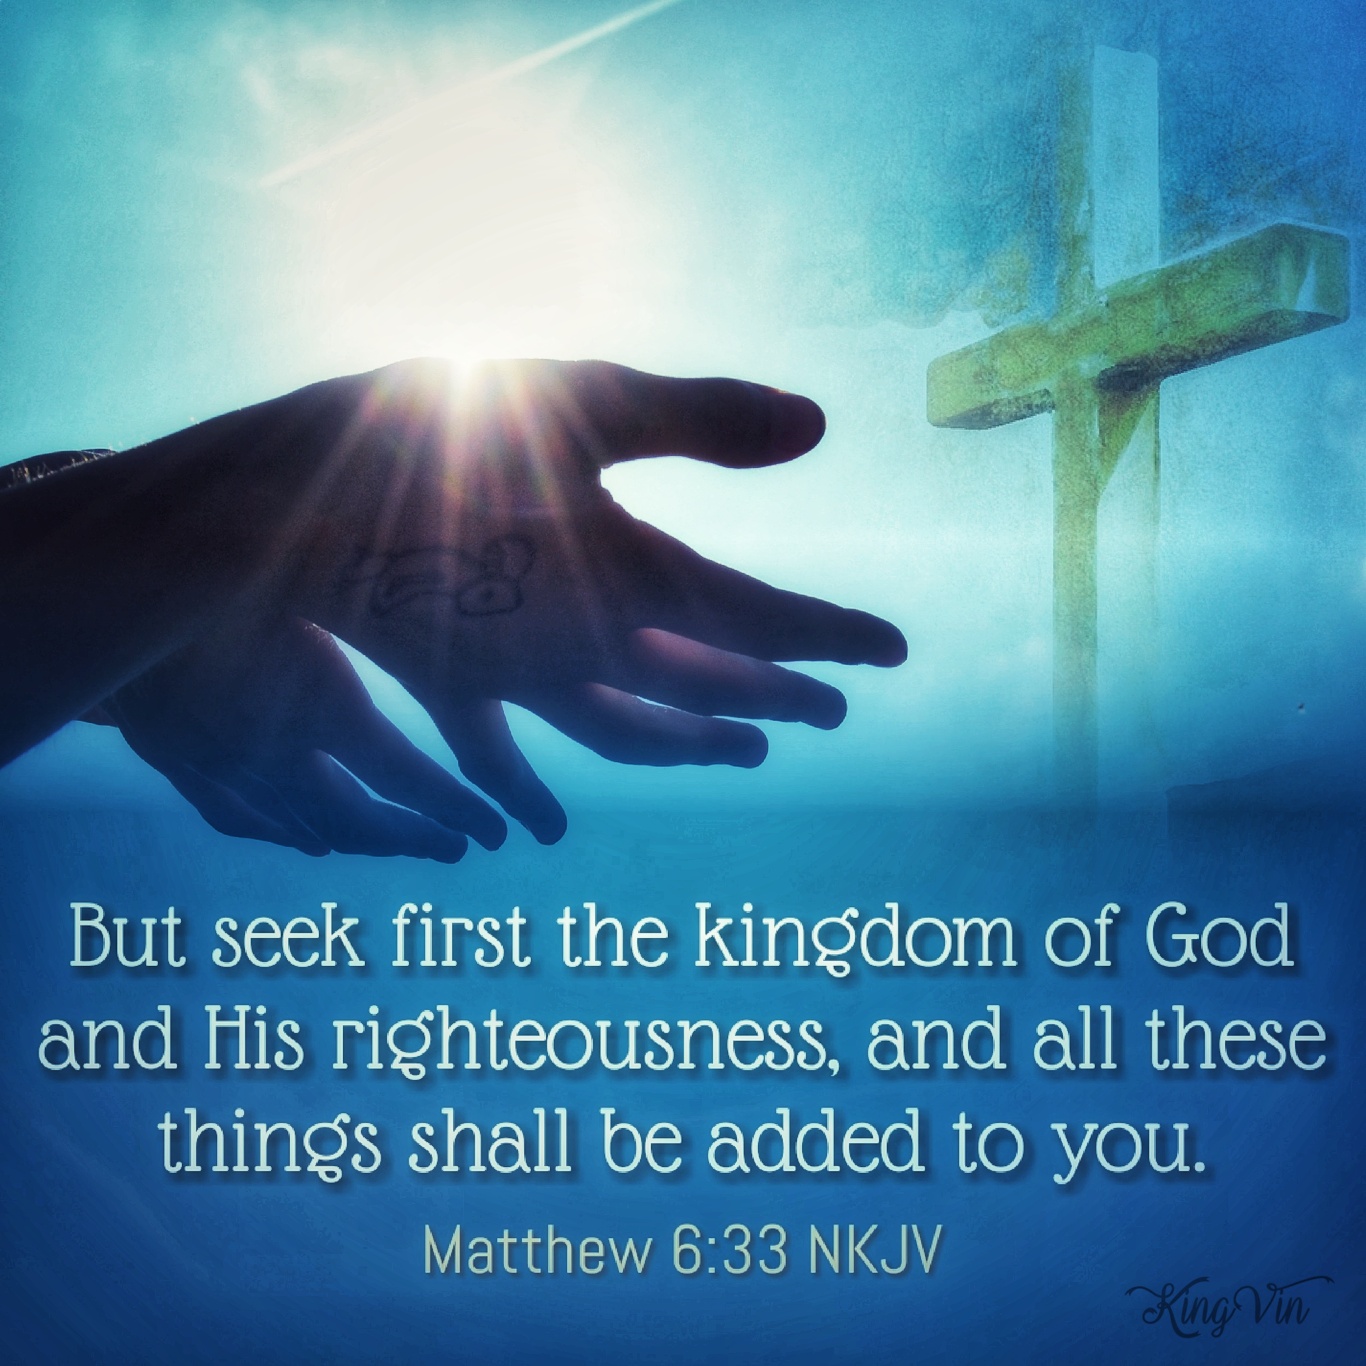 But seek first the kingdom of God and His righteousness, and all these things shall be added to you. Matthew 6:33 NKJV